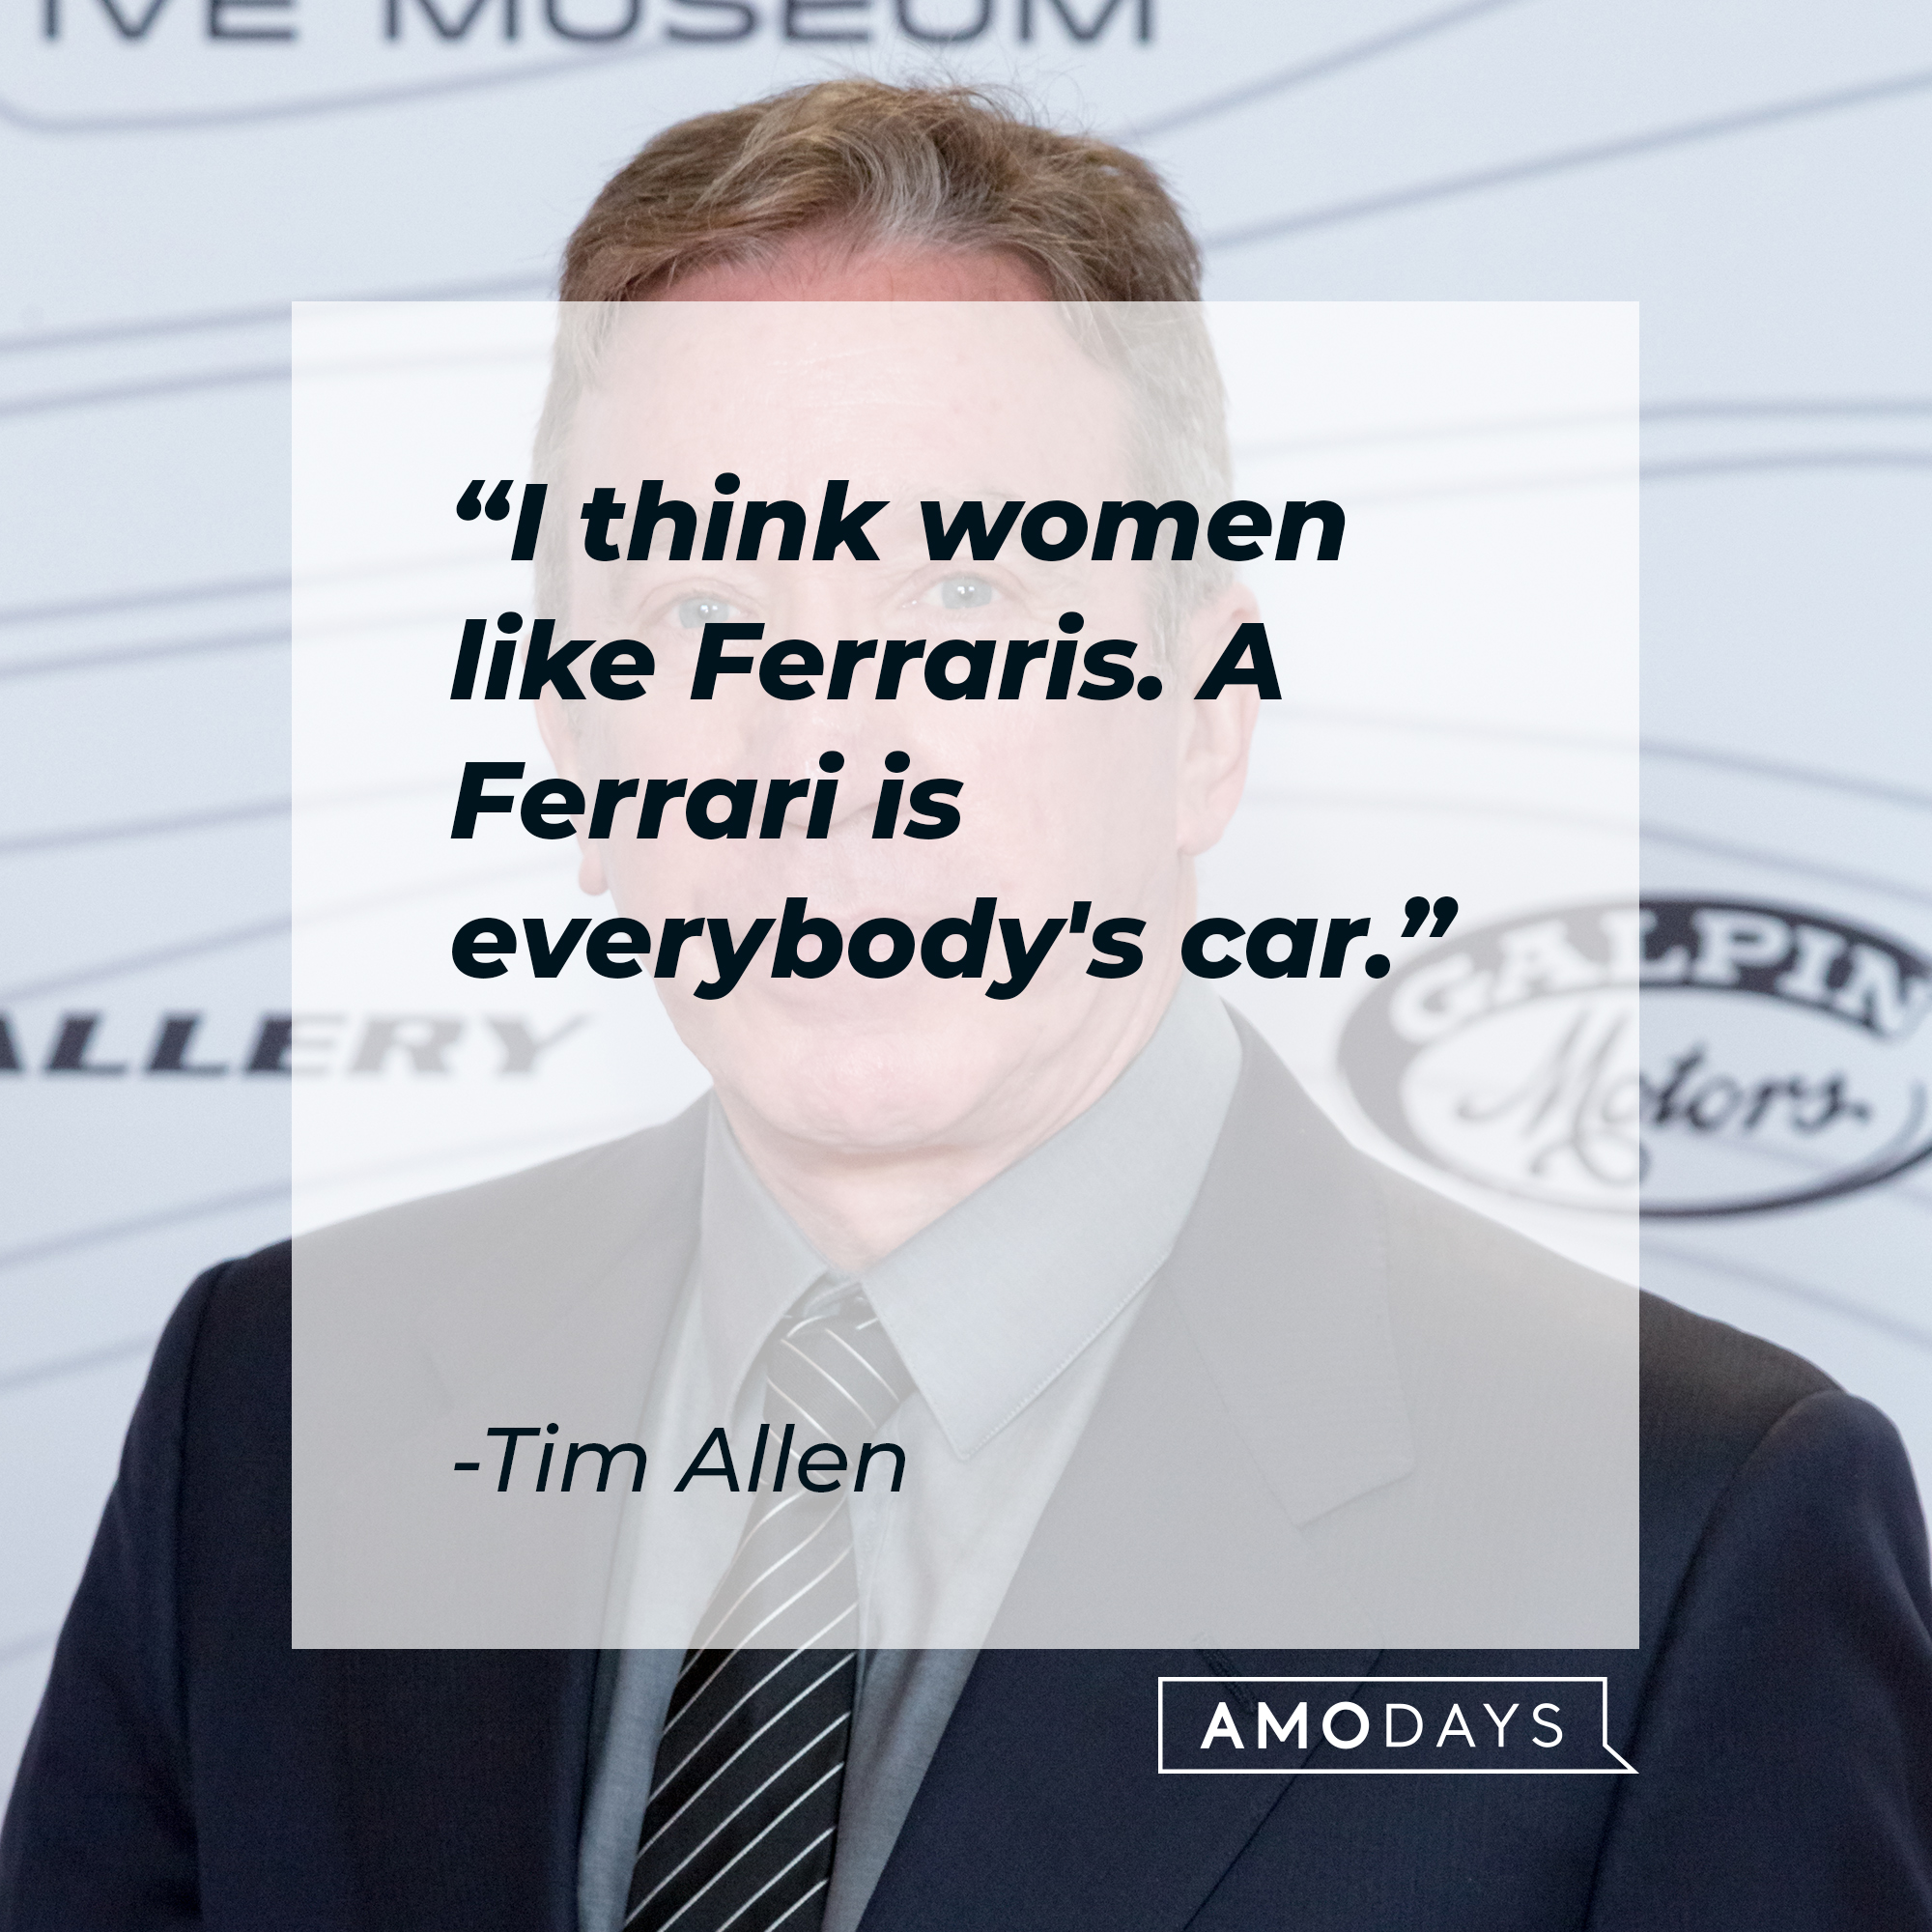 An image of Tim Allen, with his quote: “I think women like Ferraris. A Ferrari is everybody's car.”┃Source: Getty Images